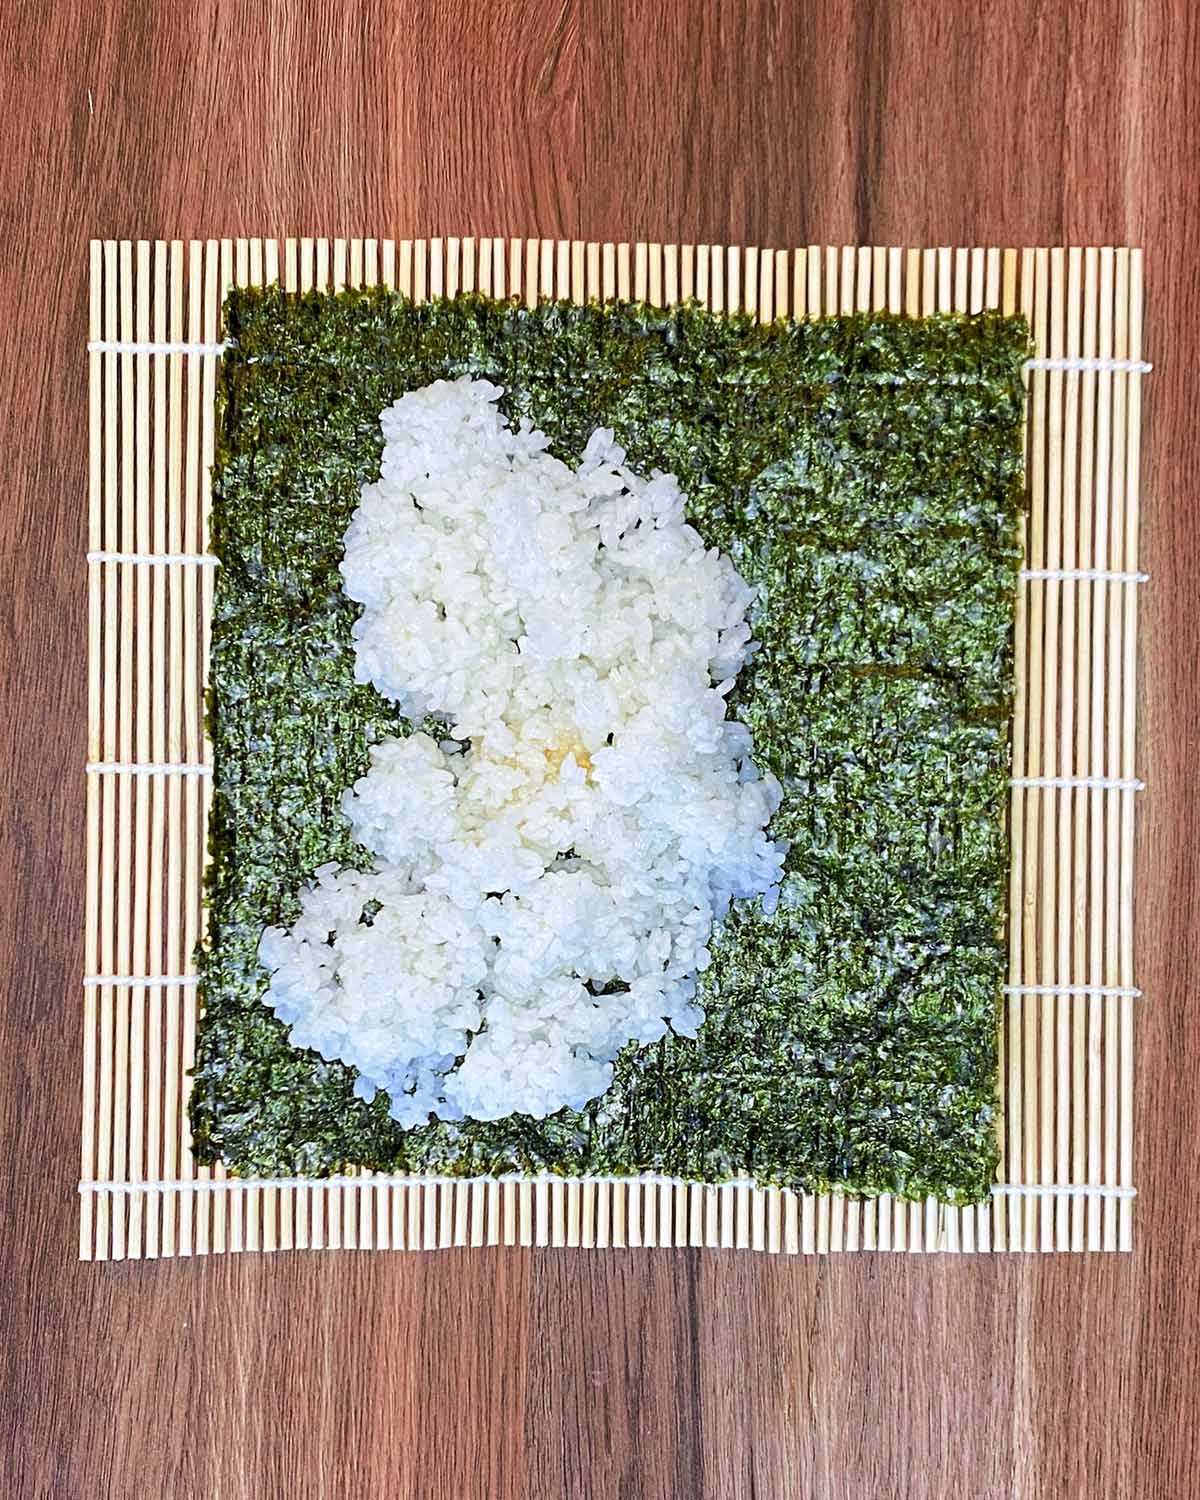 A bamboo rolling mat with nori and sushi rice on it.